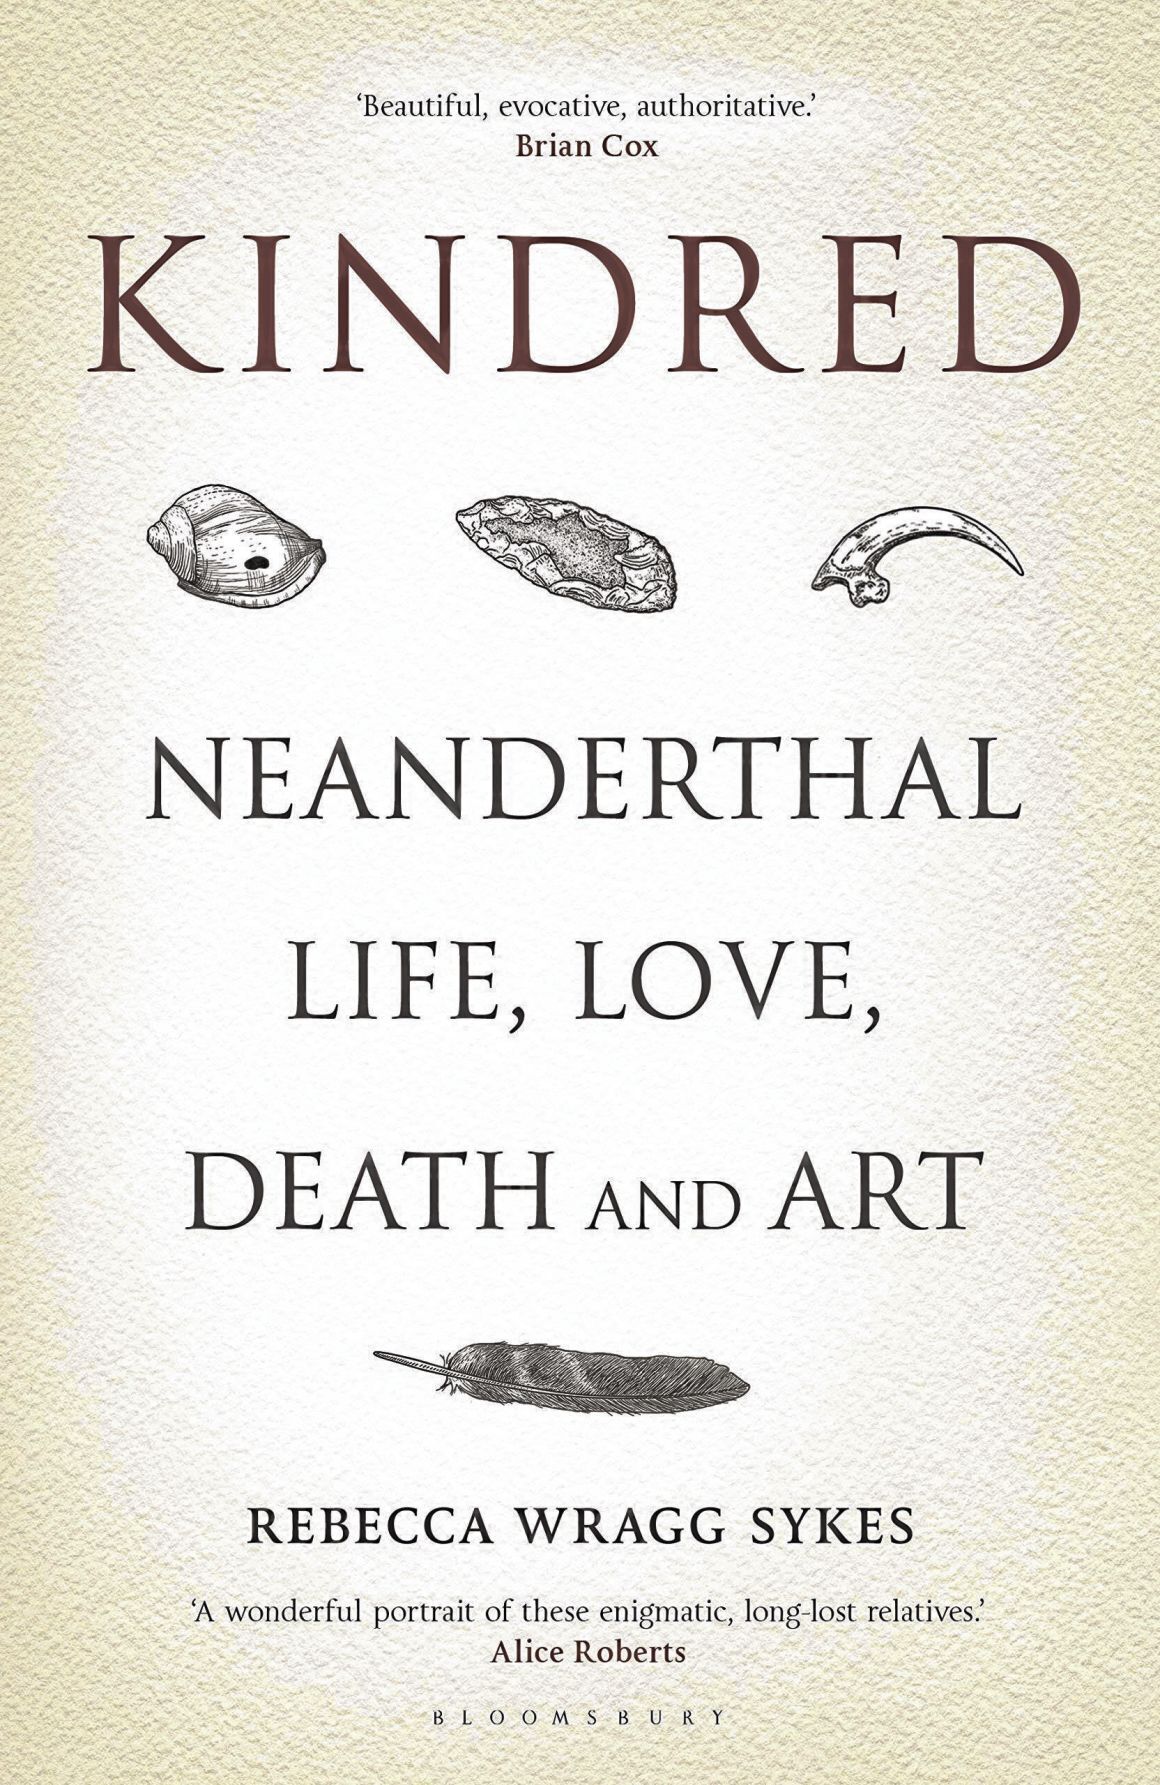 kindred by rebecca wragg sykes